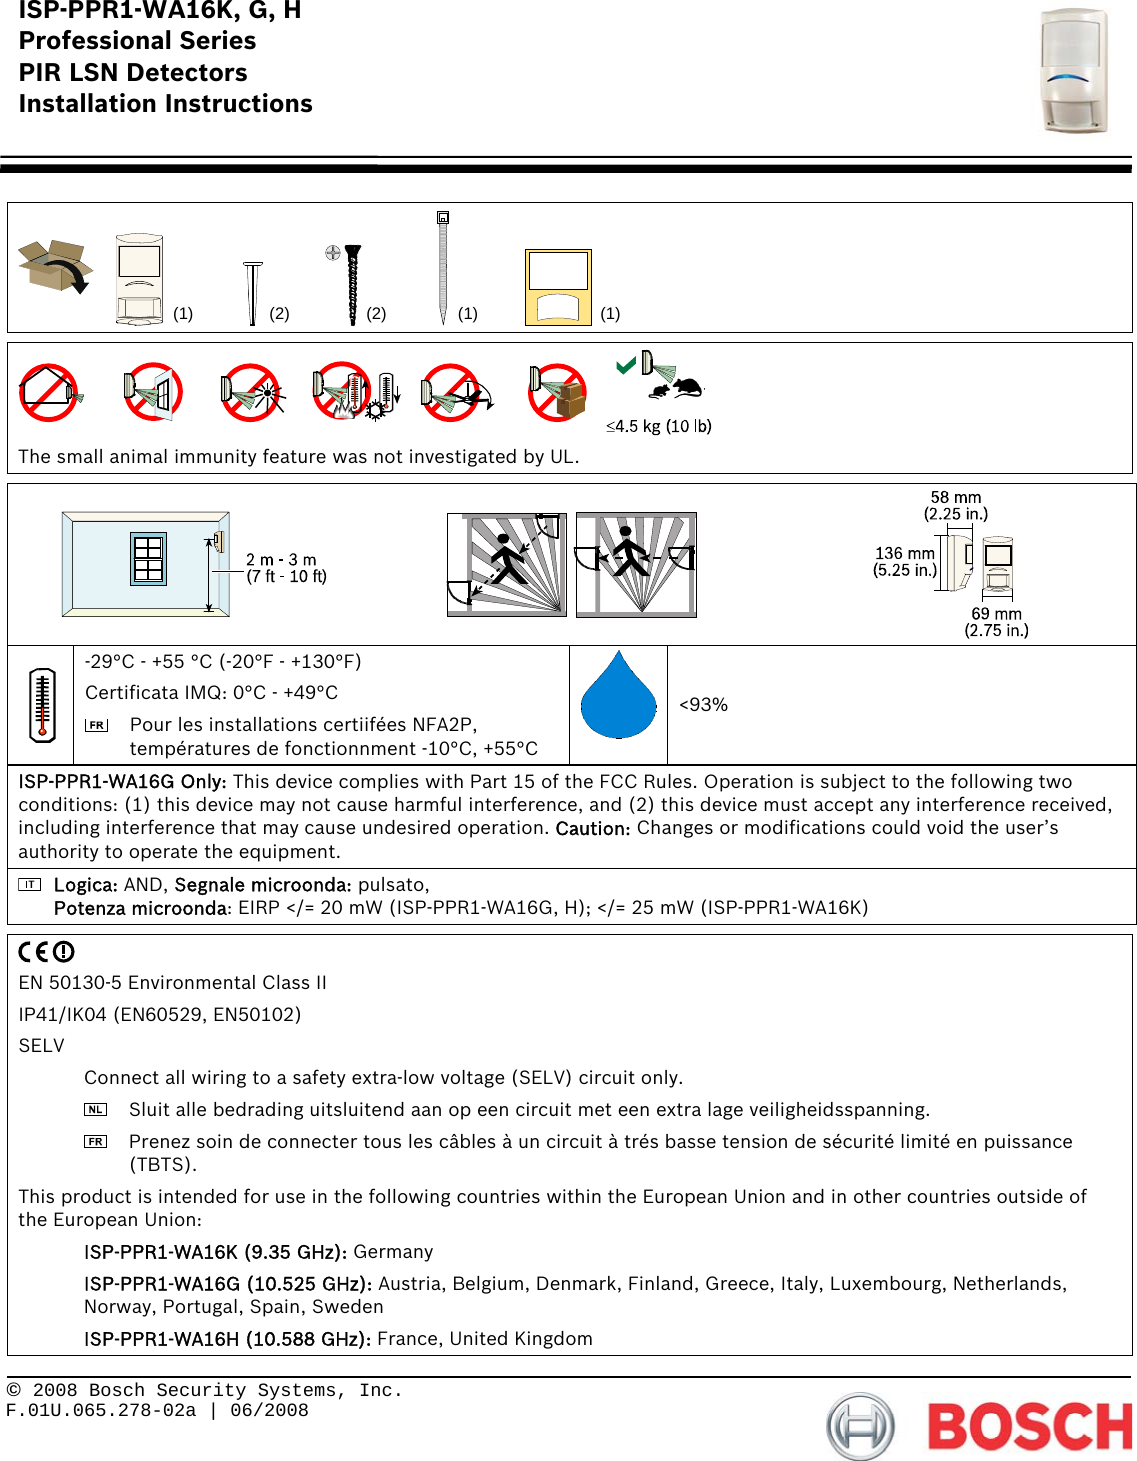 ISP-PPR1-WA16K, G, H Professional Series PIR LSN Detectors Installation Instructions      © 2008 Bosch Security Systems, Inc. F.01U.065.278-02a | 06/2008     (1) (1)(2)(2) (1)    The small animal immunity feature was not investigated by UL.      -29°C - +55 °C (-20°F - +130°F) Certificata IMQ: 0°C - +49°C   Pour les installations certiifées NFA2P, températures de fonctionnment -10°C, +55°C &lt;93% ISP-PPR1-WA16G Only: This device complies with Part 15 of the FCC Rules. Operation is subject to the following two conditions: (1) this device may not cause harmful interference, and (2) this device must accept any interference received, including interference that may cause undesired operation. Caution: Changes or modifications could void the user’s authority to operate the equipment.  Logica: AND, Segnale microonda: pulsato, Potenza microonda: EIRP &lt;/= 20 mW (ISP-PPR1-WA16G, H); &lt;/= 25 mW (ISP-PPR1-WA16K)   EN 50130-5 Environmental Class II IP41/IK04 (EN60529, EN50102) SELV   Connect all wiring to a safety extra-low voltage (SELV) circuit only.    Sluit alle bedrading uitsluitend aan op een circuit met een extra lage veiligheidsspanning.    Prenez soin de connecter tous les câbles à un circuit à trés basse tension de sécurité limité en puissance (TBTS). This product is intended for use in the following countries within the European Union and in other countries outside of the European Union:  ISP-PPR1-WA16K (9.35 GHz): Germany  ISP-PPR1-WA16G (10.525 GHz): Austria, Belgium, Denmark, Finland, Greece, Italy, Luxembourg, Netherlands, Norway, Portugal, Spain, Sweden  ISP-PPR1-WA16H (10.588 GHz): France, United Kingdom 